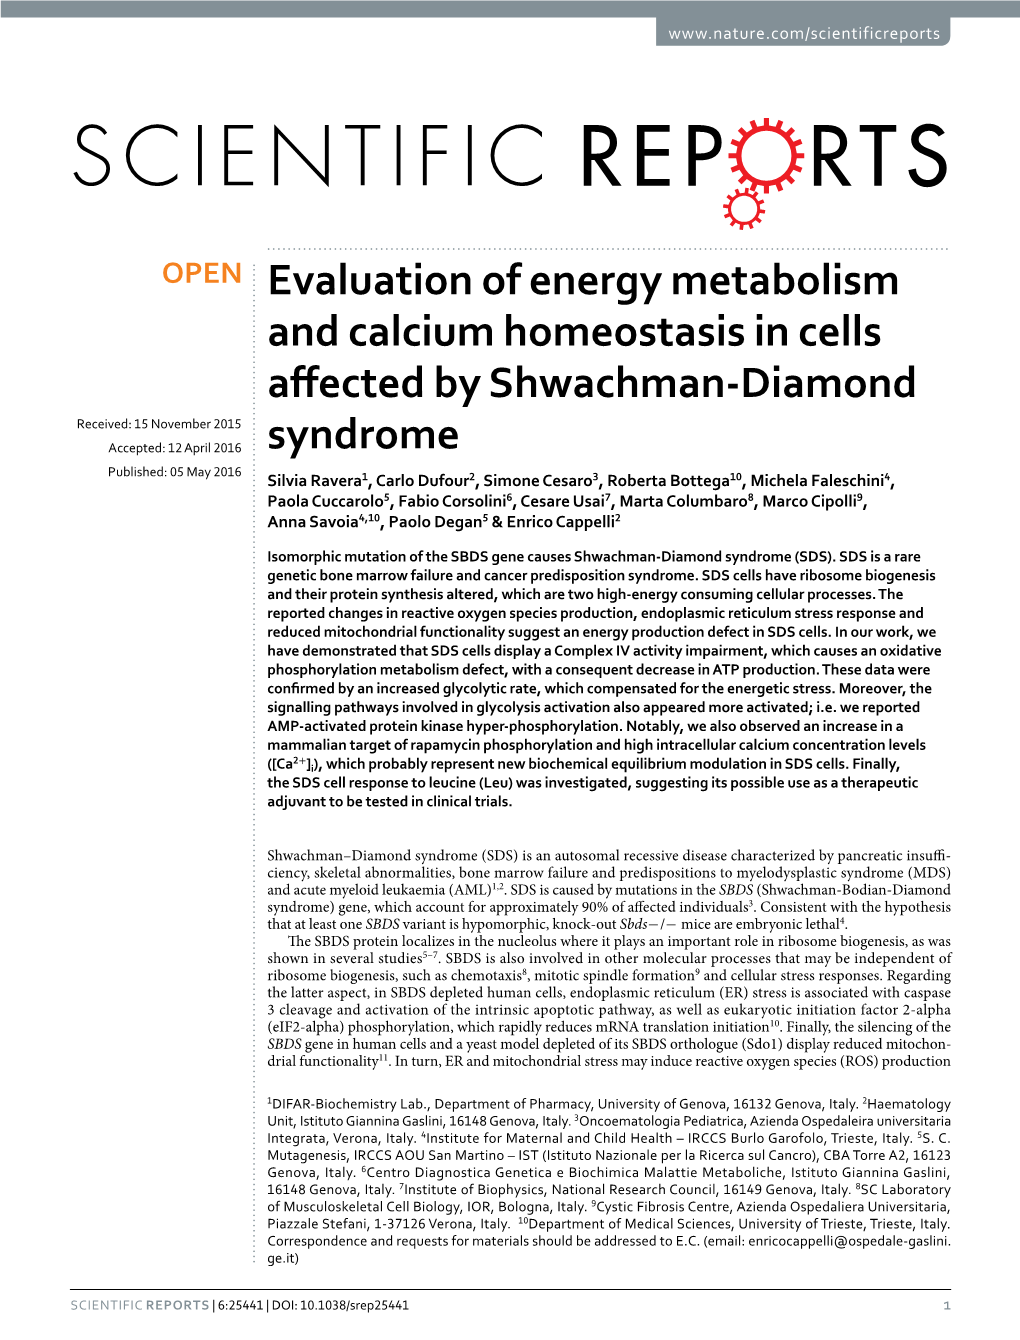 Evaluation of Energy Metabolism and Calcium Homeostasis in Cells